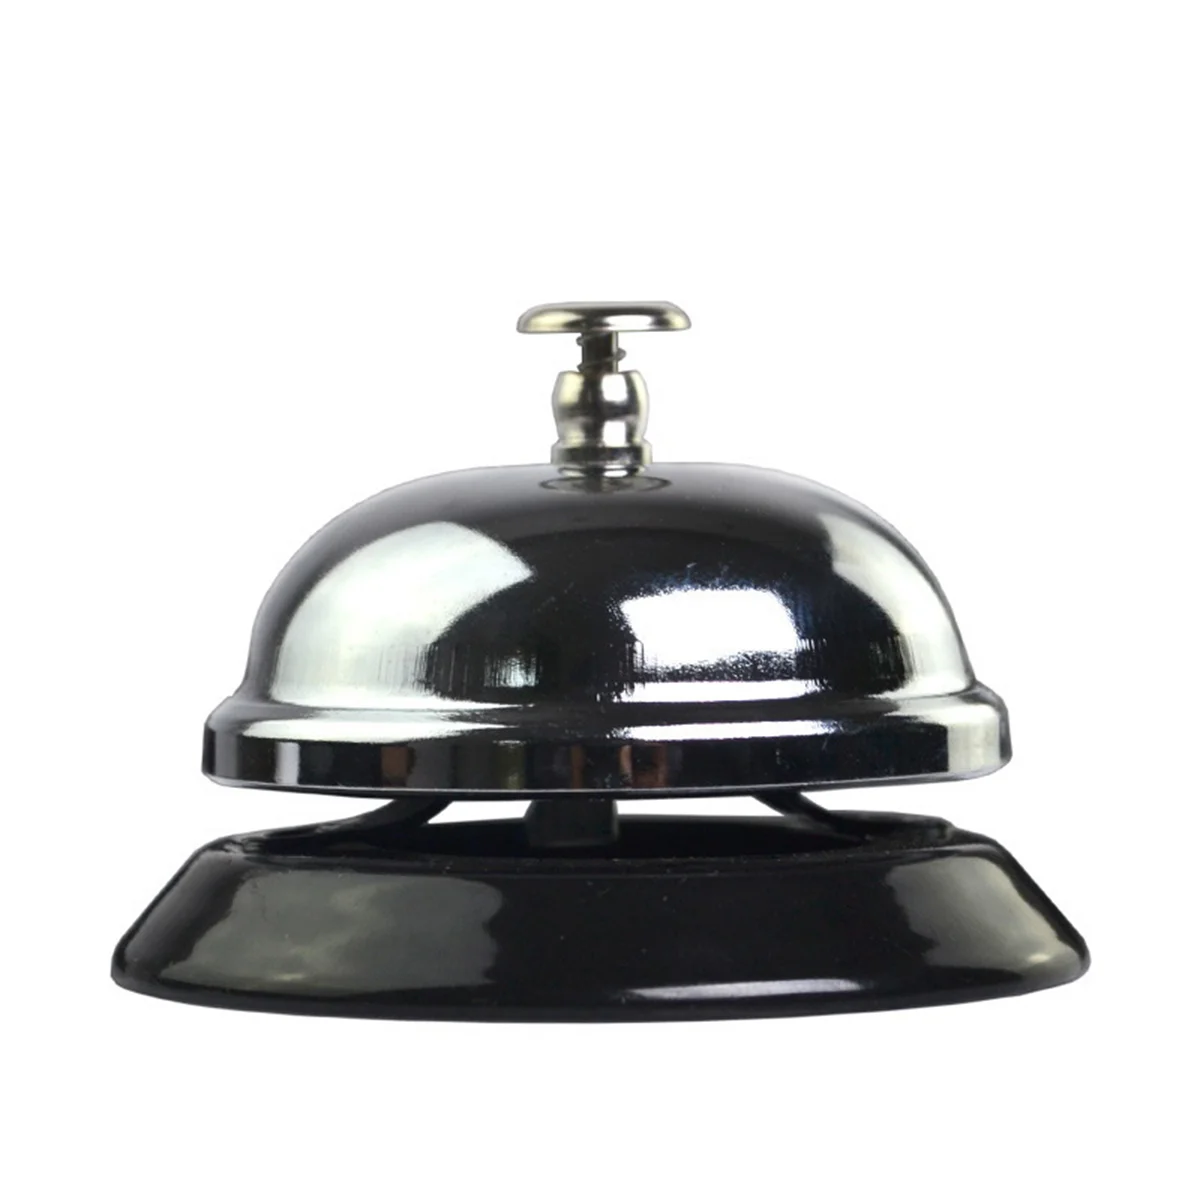 

Service Bell Desk Bell Ring Reception Bell Hands Pressing Game Bell Bell for Restaurant Hotel Kitchen Home Family Game ( Silver